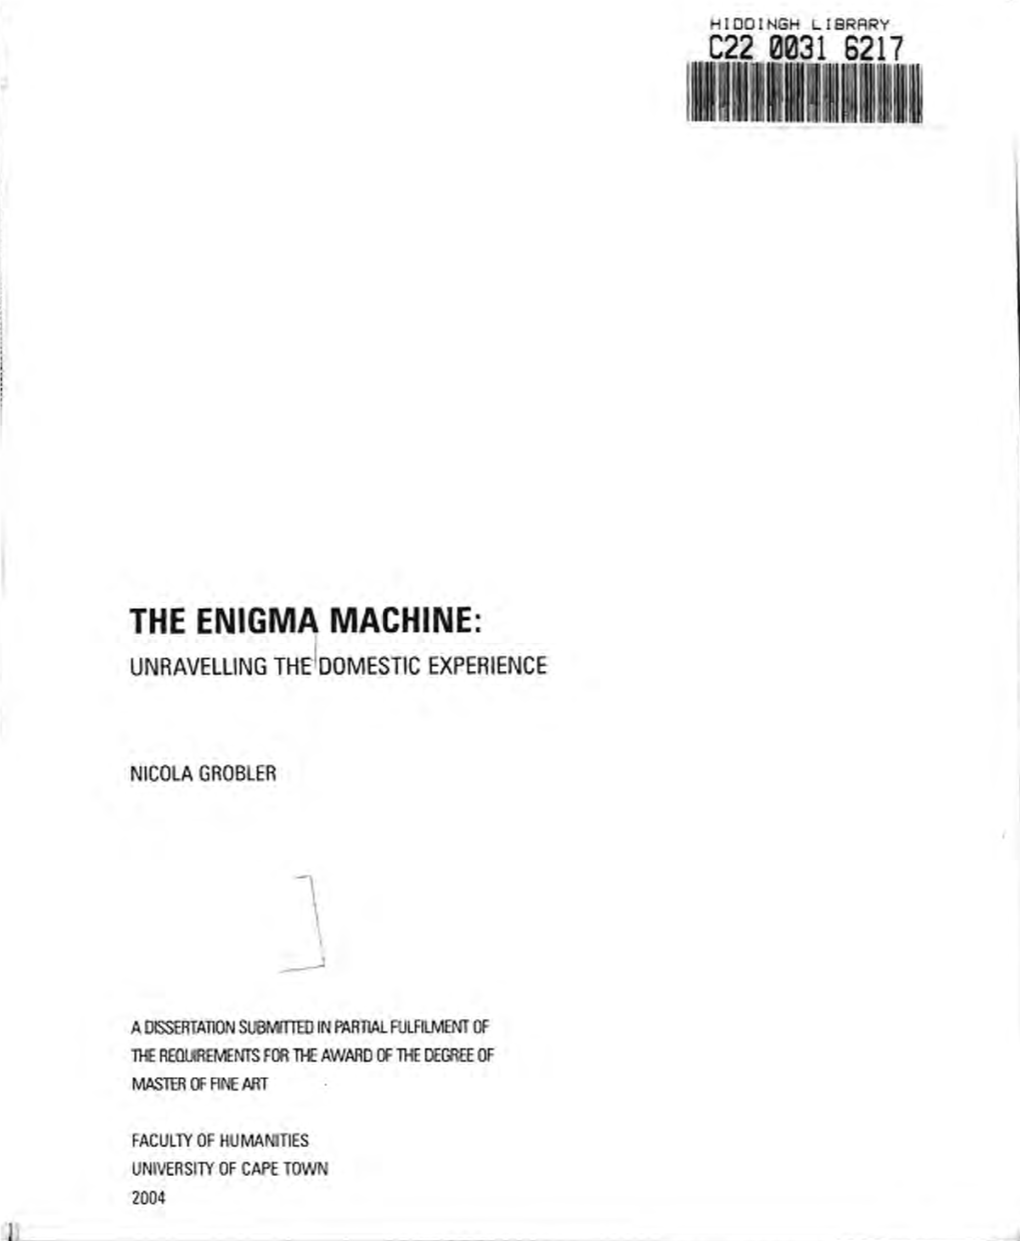 The Enigma Machine: Unravelling the Domestic Experience